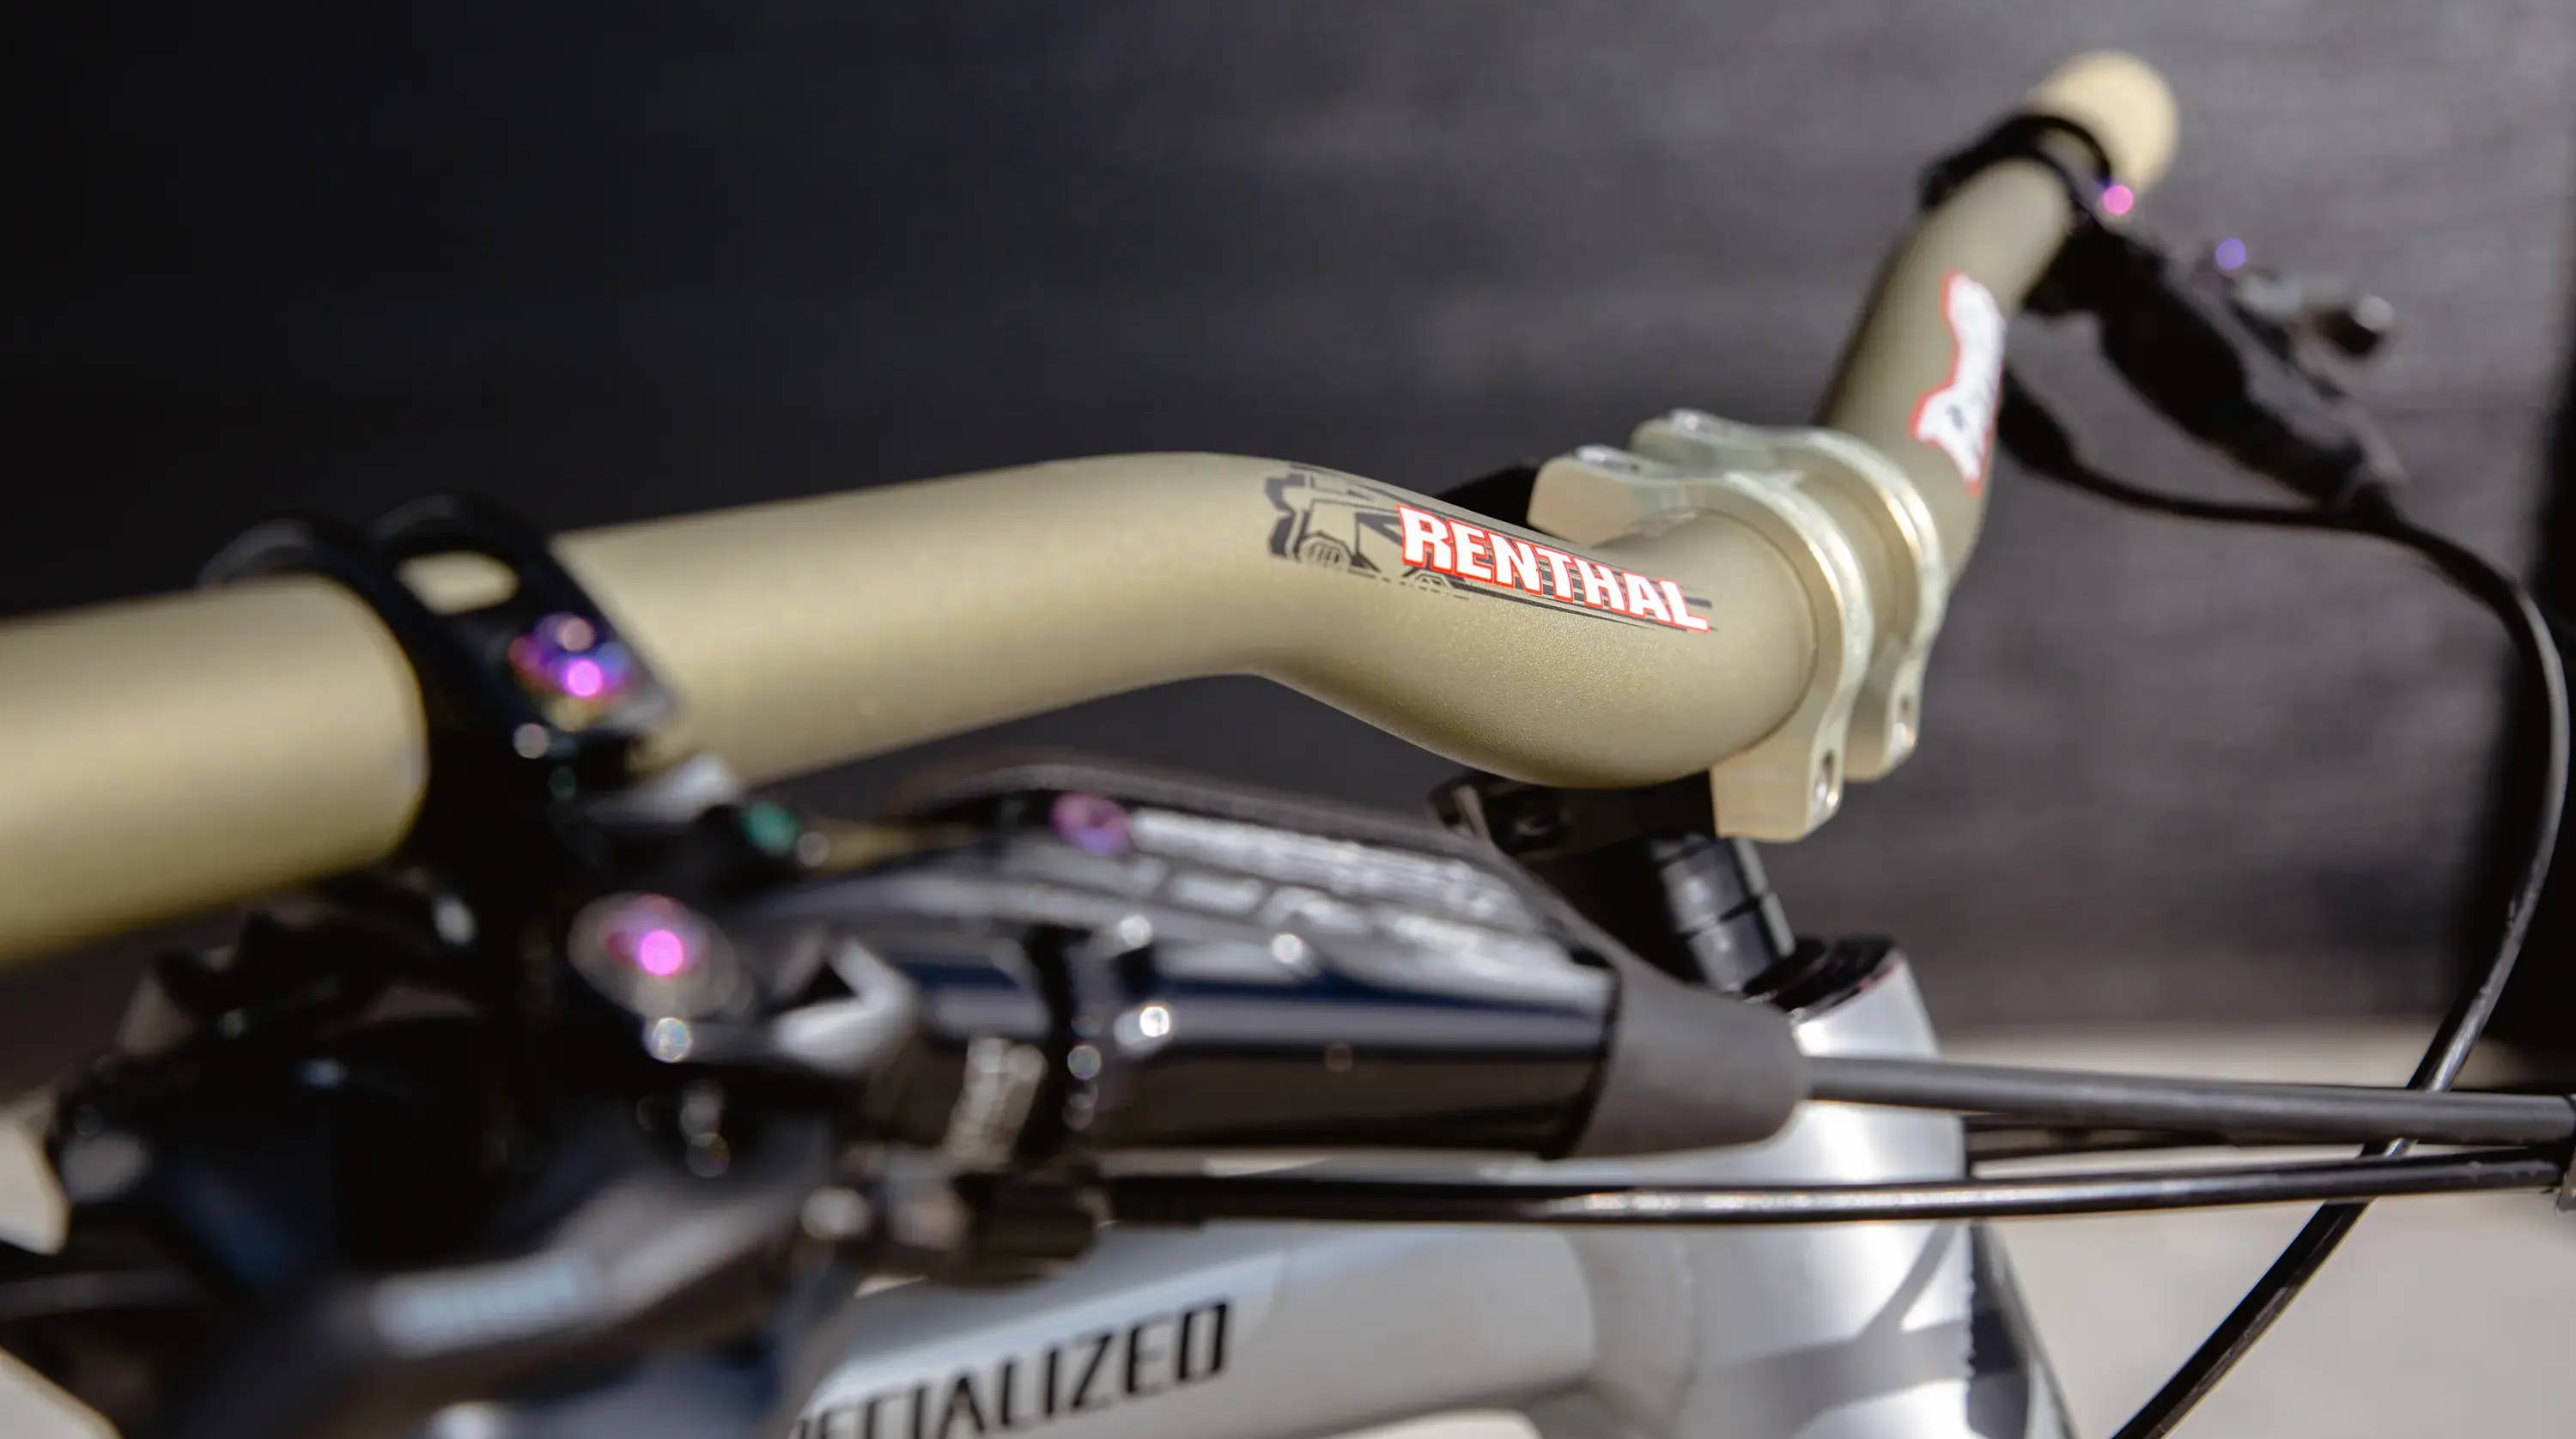 renthal apex 35 mountain bike stem with renthal fatbars attached on a stumpjumper evo alloy